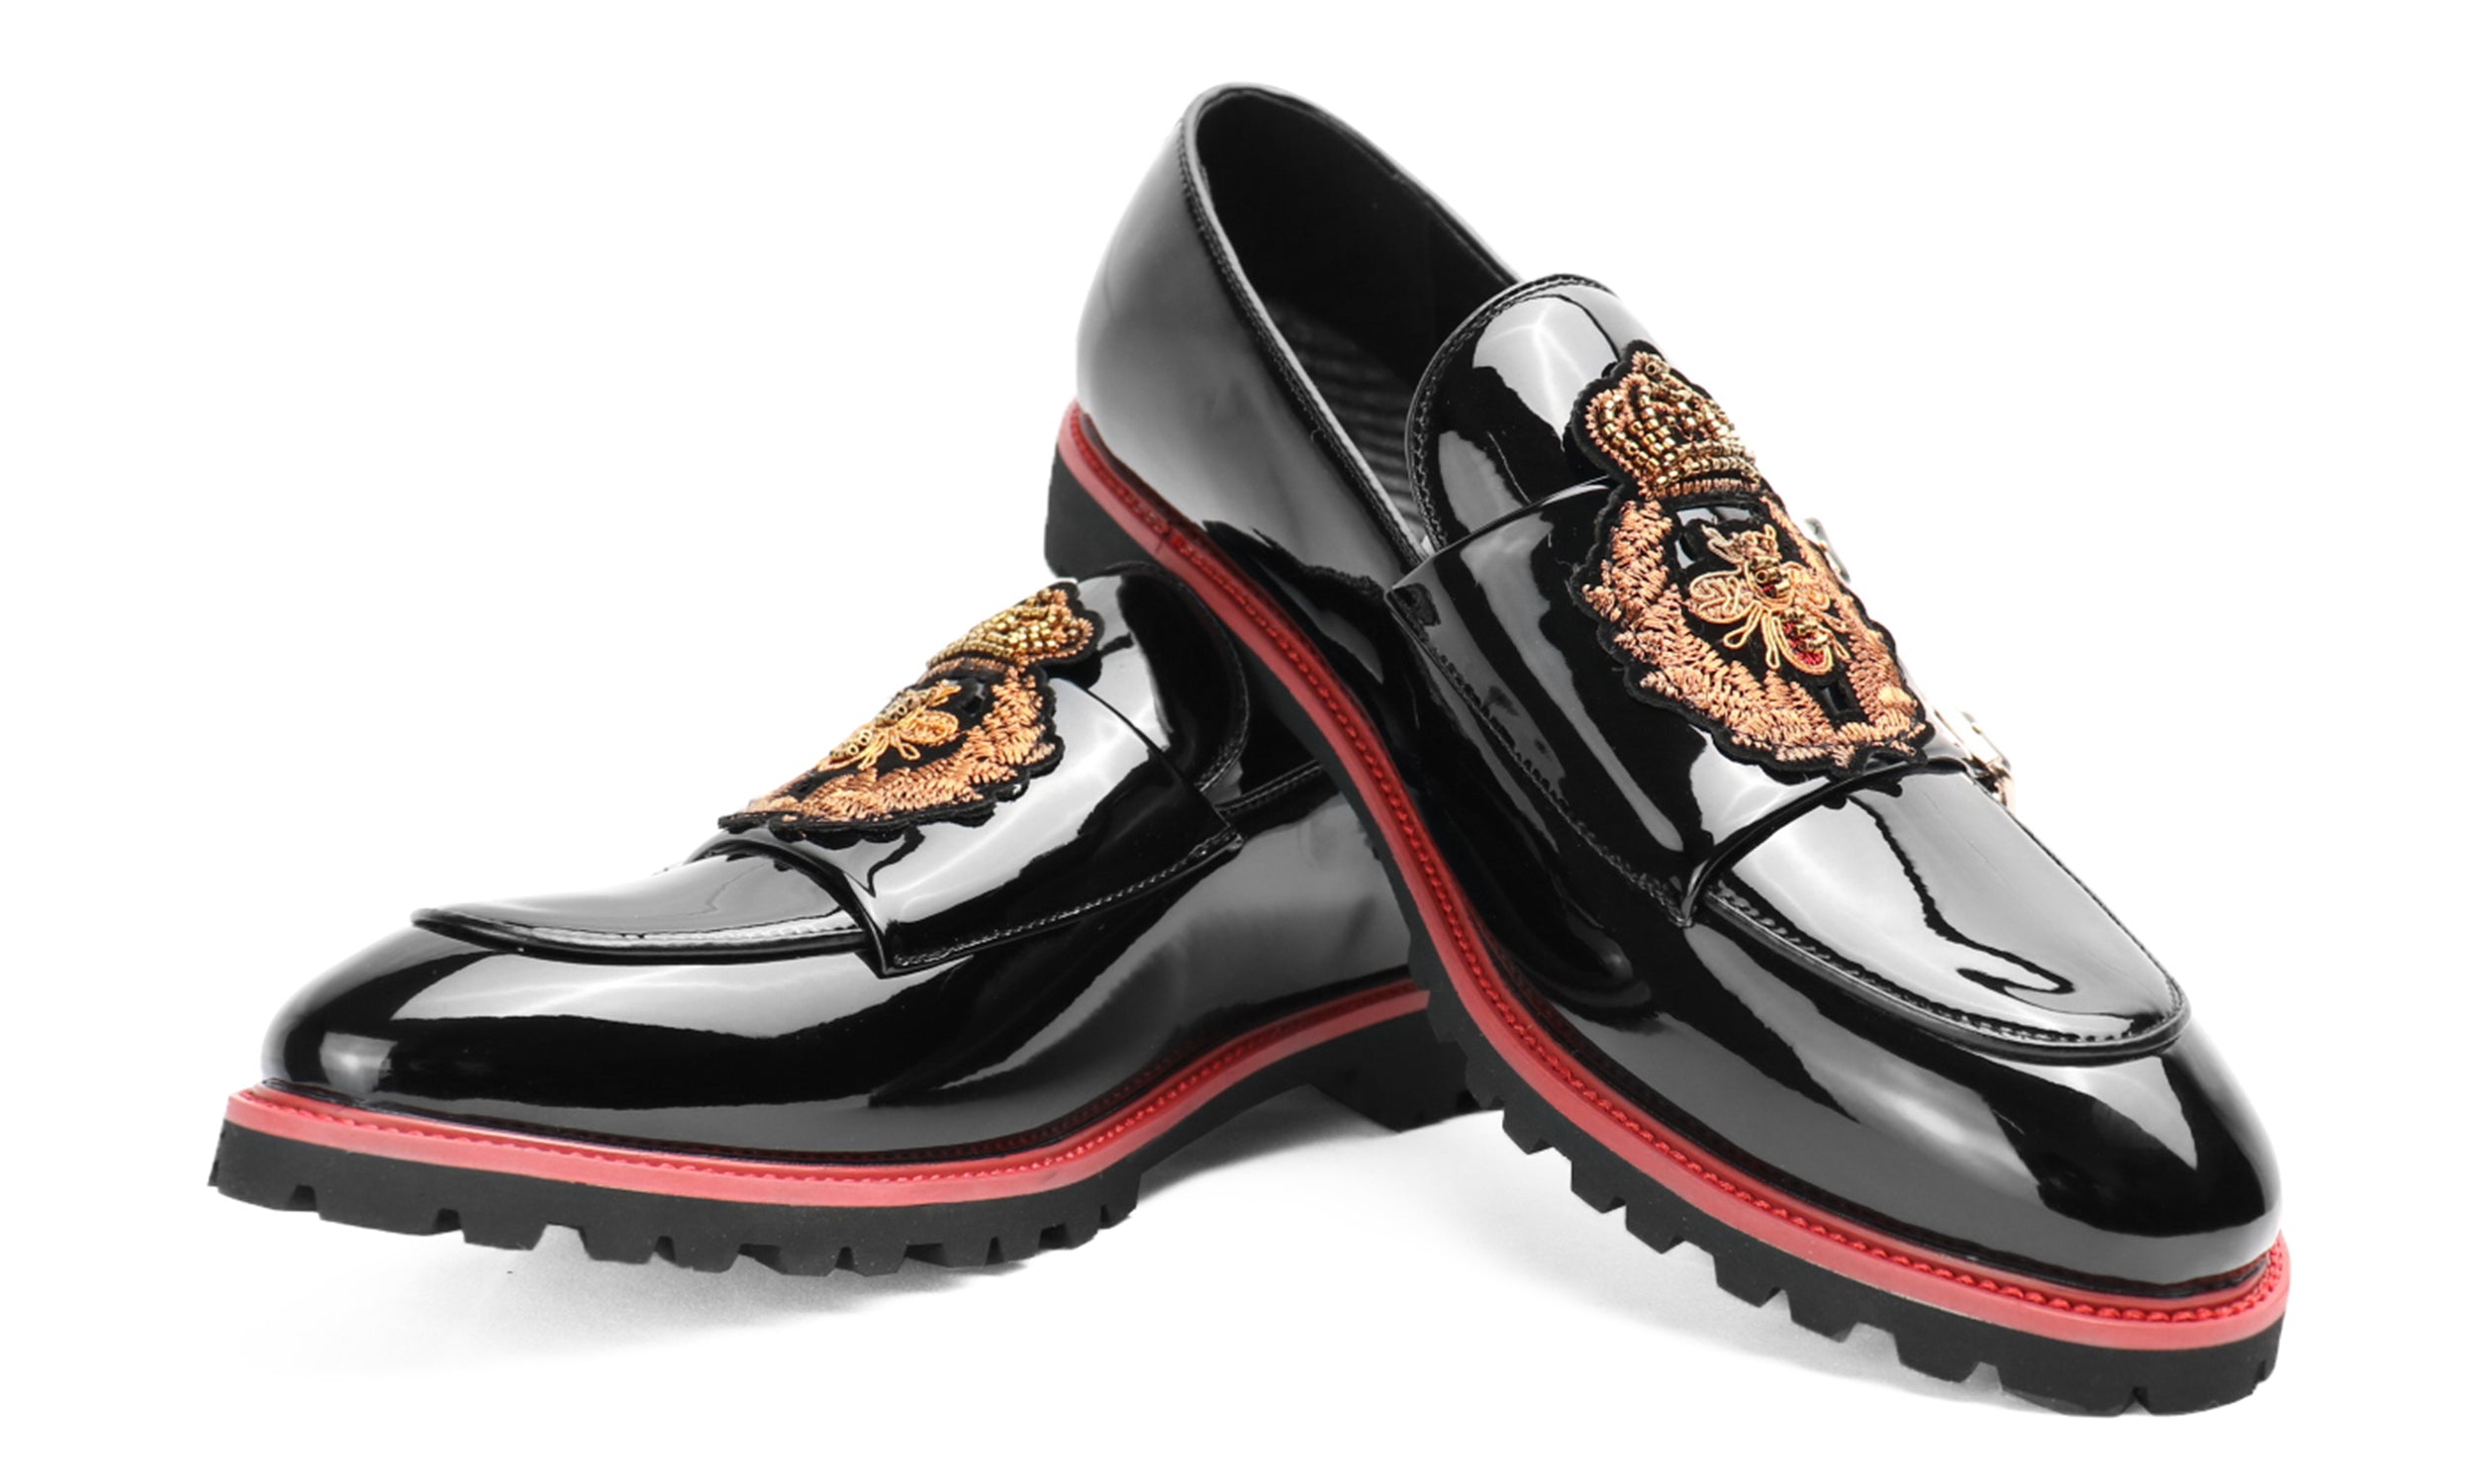 Men's Embroidery Lug Sole Loafers